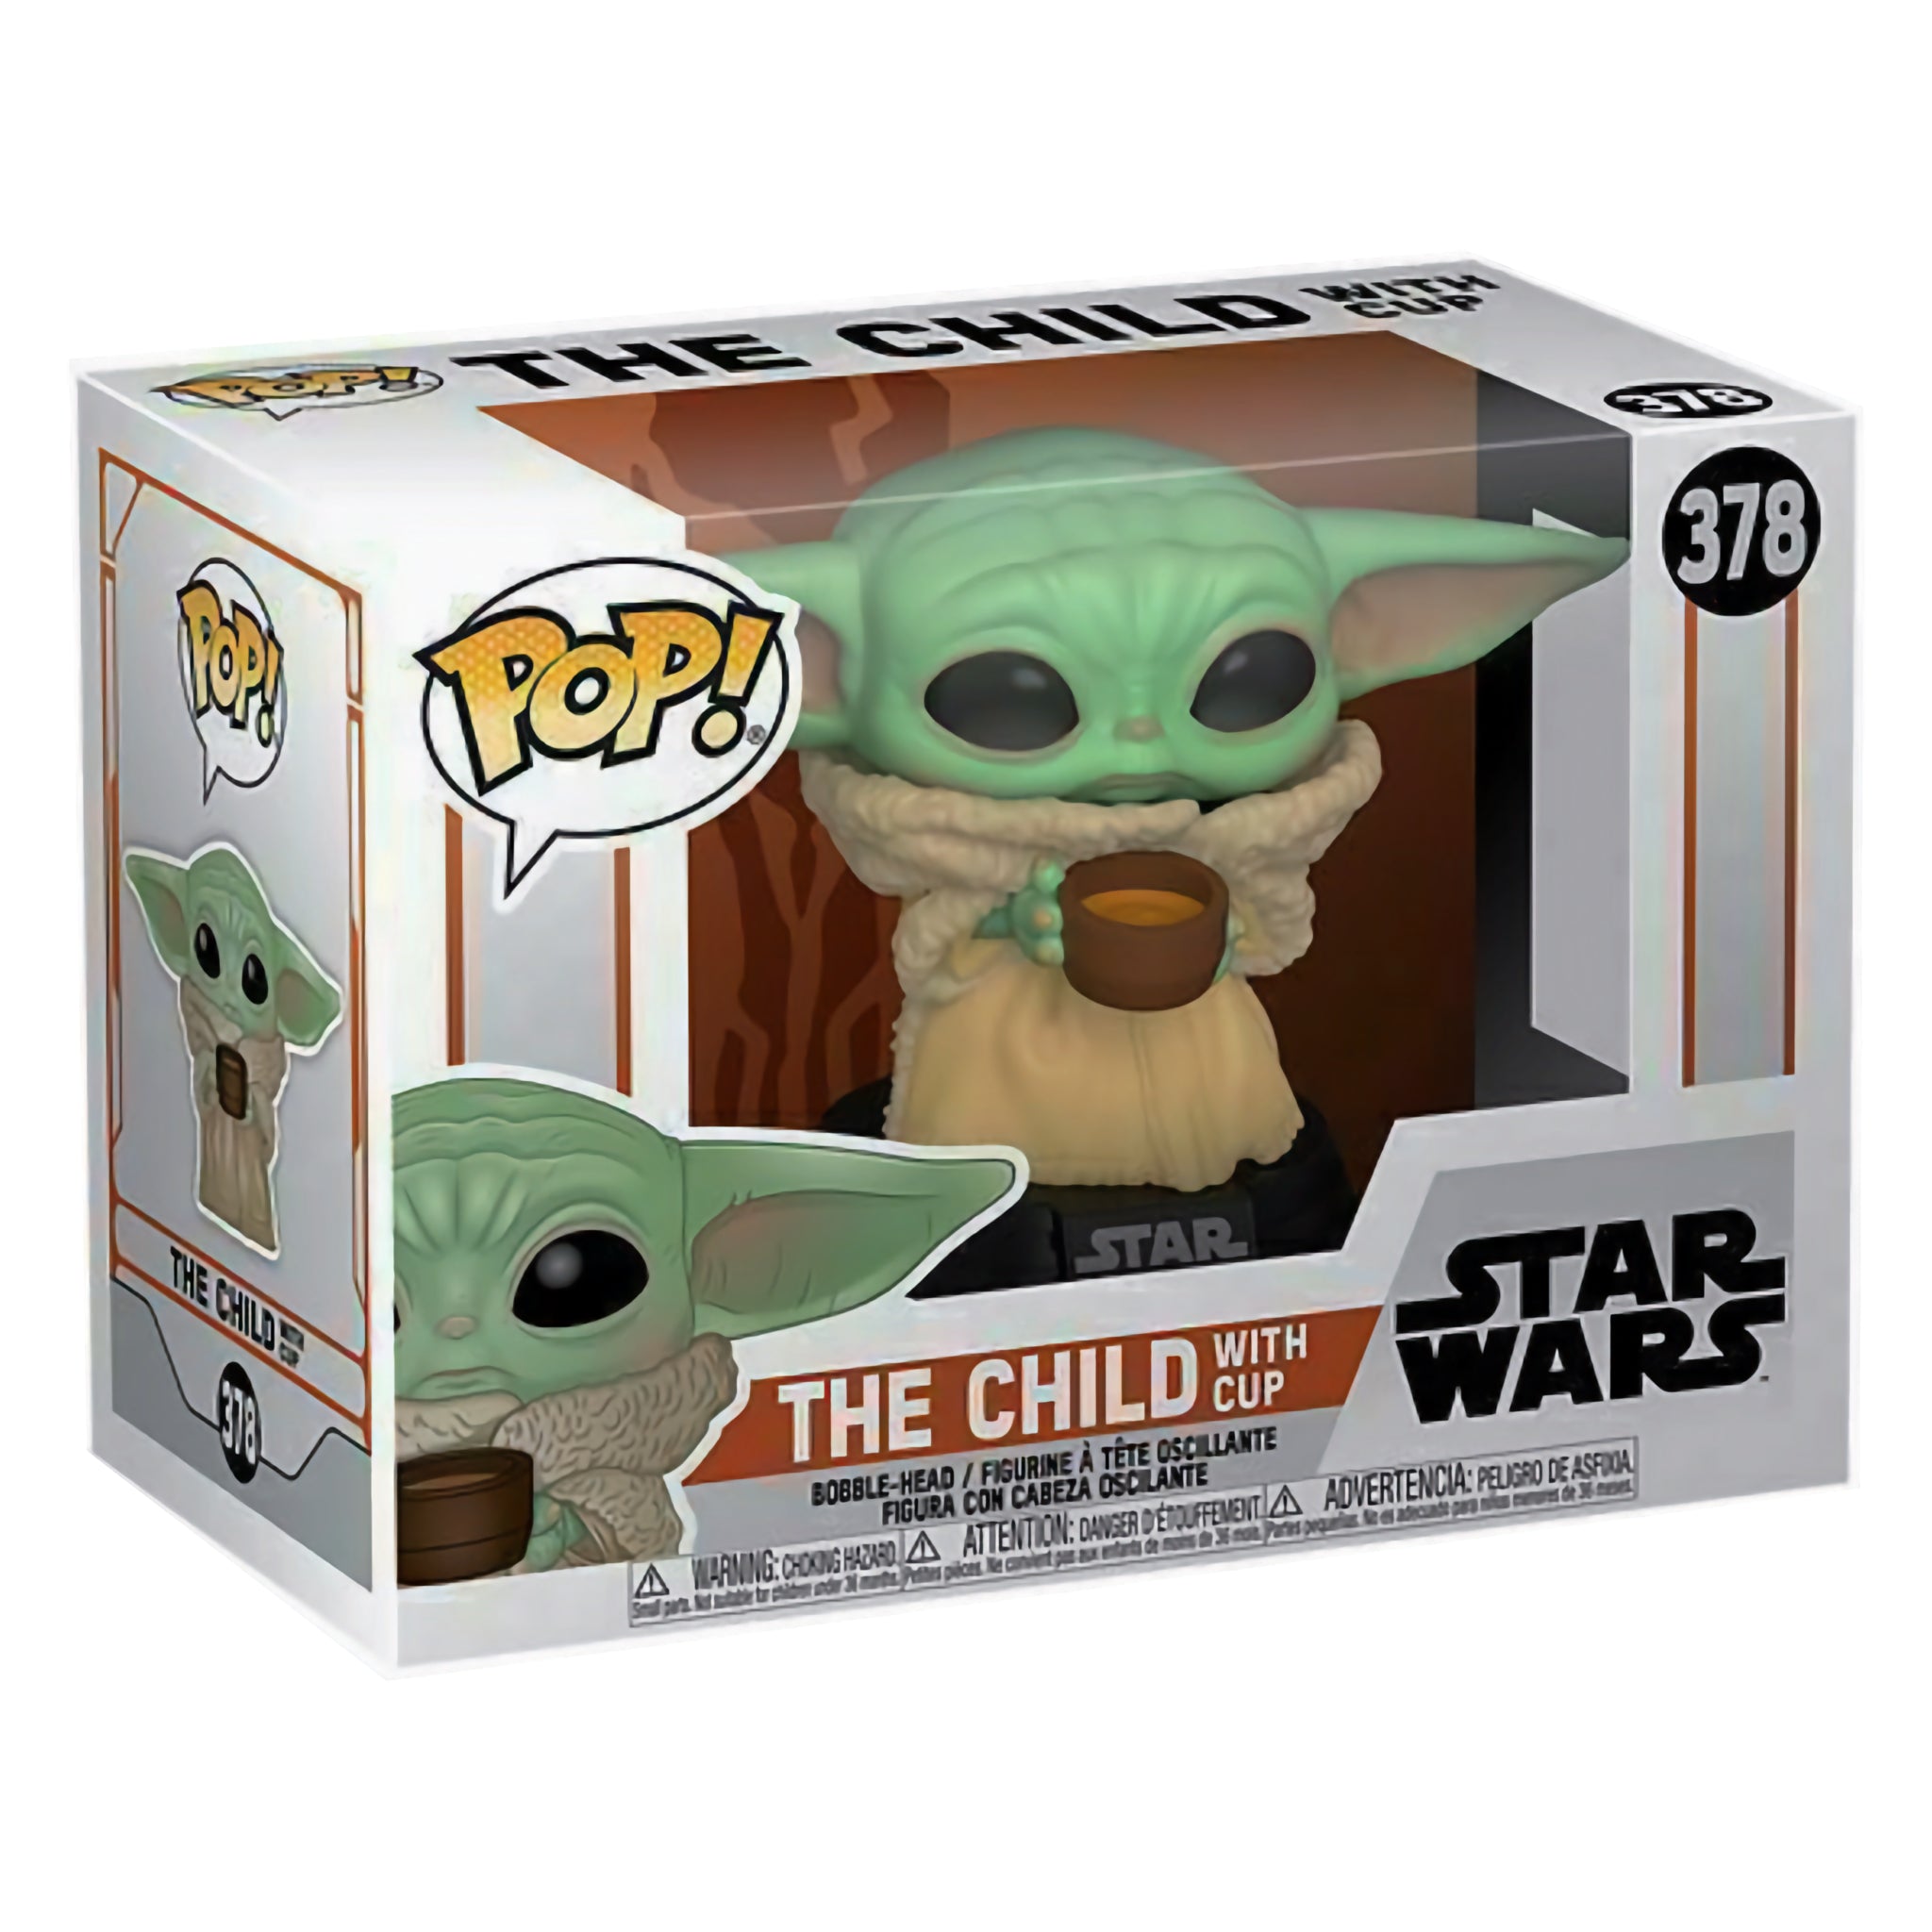 The Child with Cup Funko Pop!